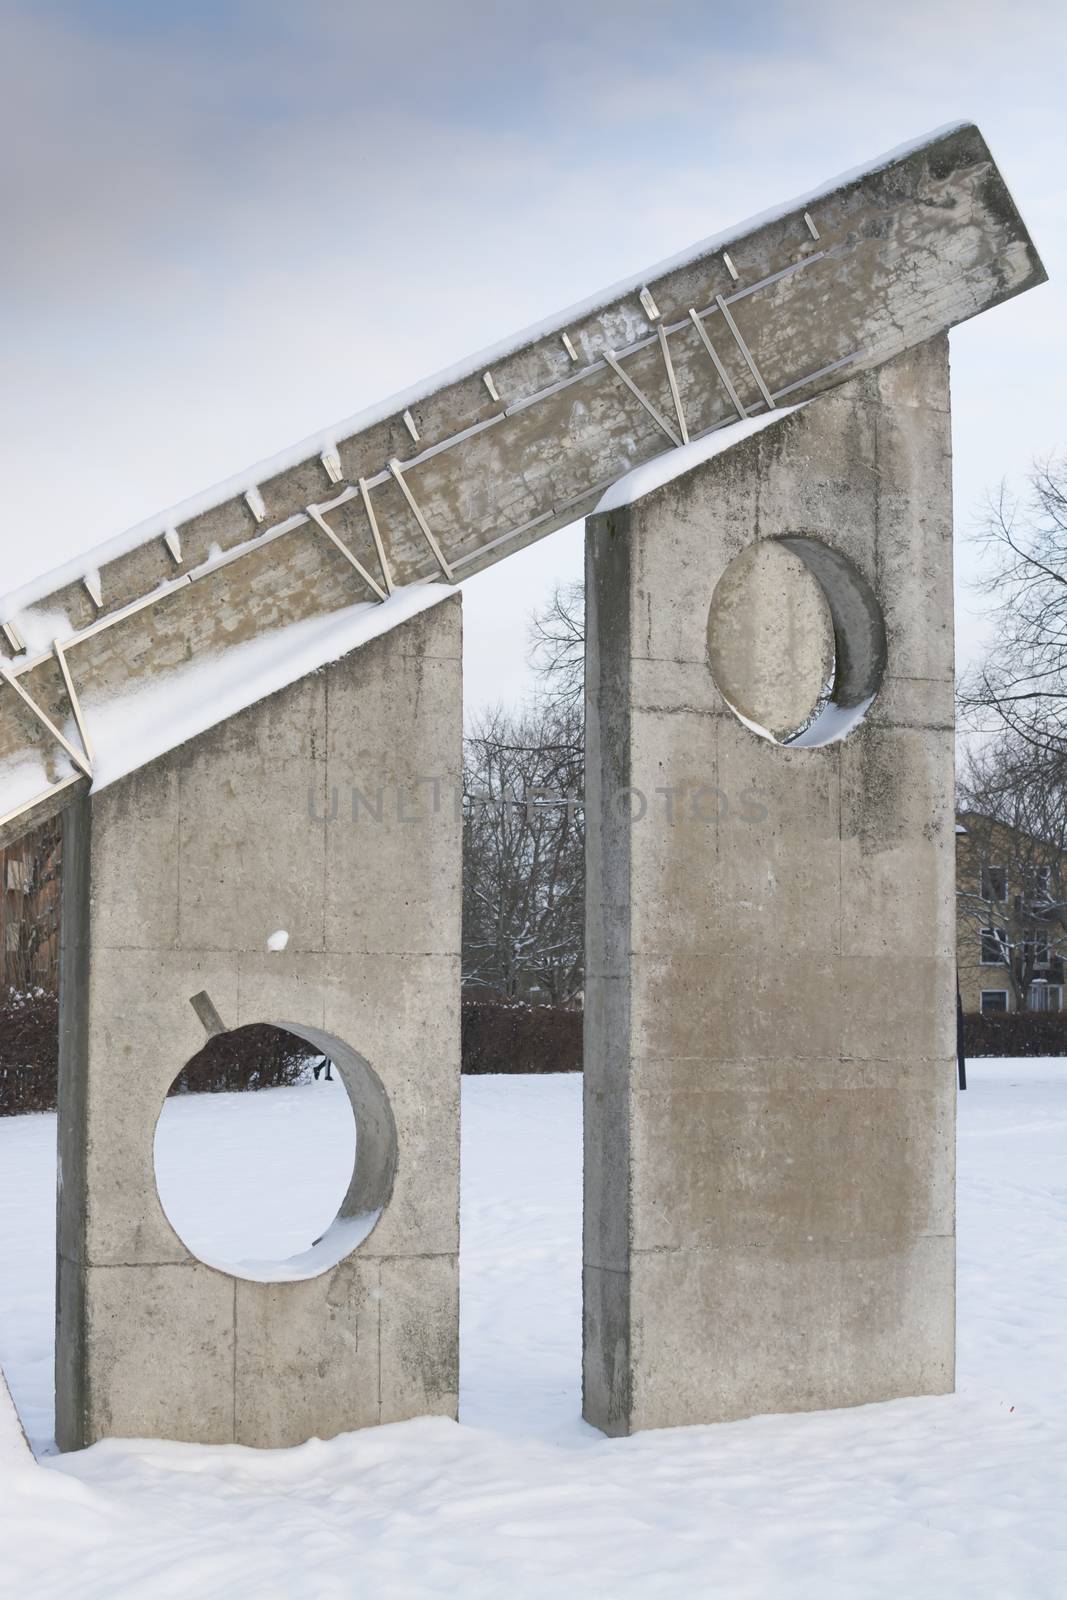 Winter sculpture detail in snow - with roman numbers six and seven - The Sundial by Sven Goran Holmstrom, Solursparken, Vallingby, Stockholm, Sweden.